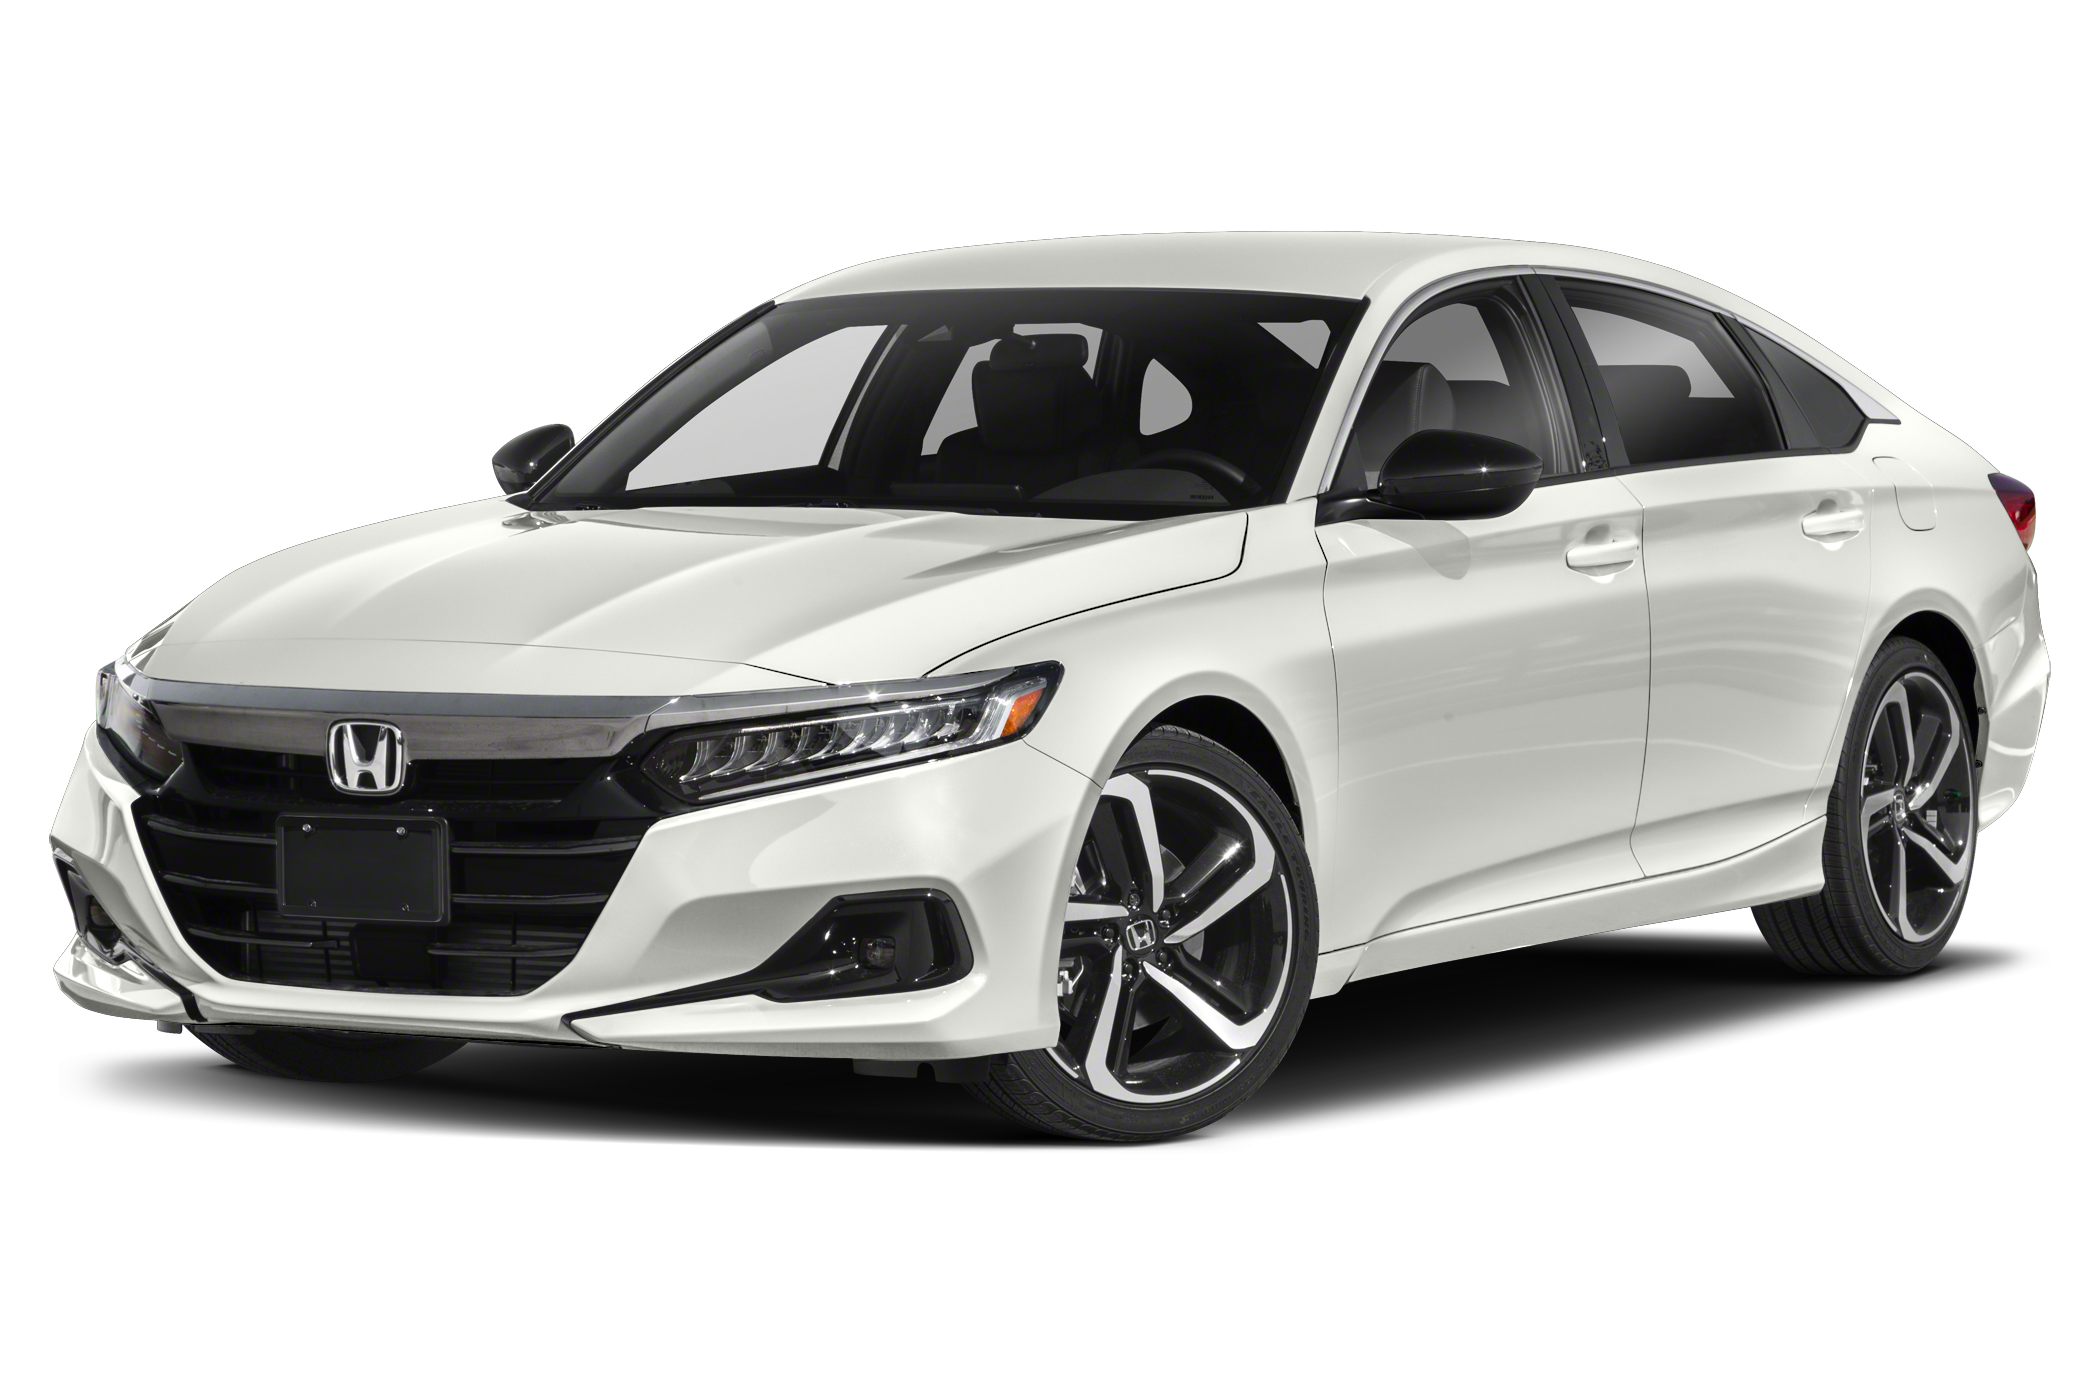 2021 Honda Accord Sport For Sale And Price Near Me - Wallpaper Database